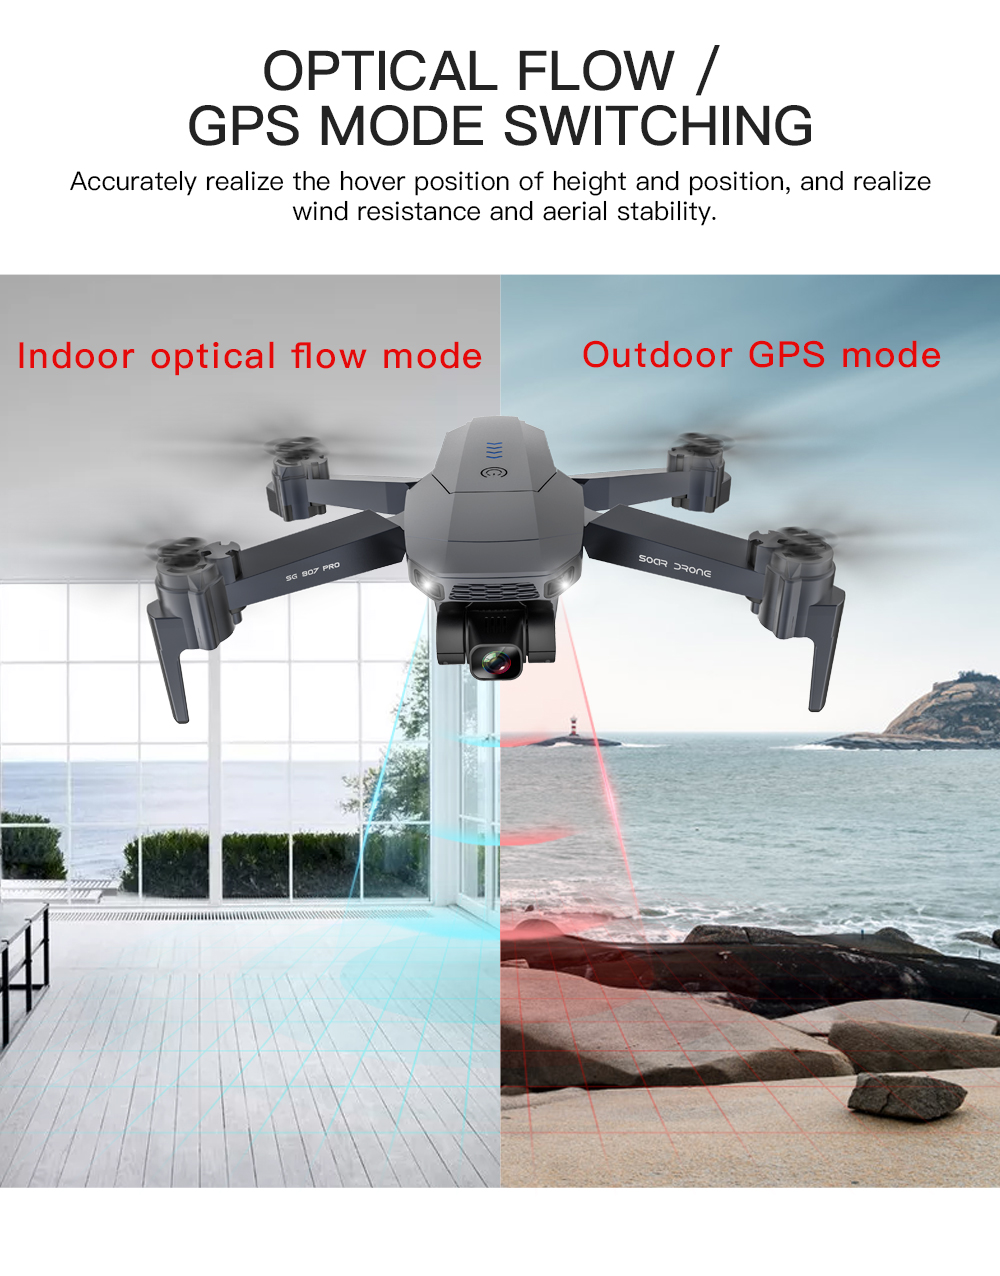 ZLL-SG907-Pro-5G-WIFI-FPV-GPS-With-4K-HD-Dual-Camera-Two-axis-Gimbal-Optical-Flow-Positioning-Foldab-1759952-14